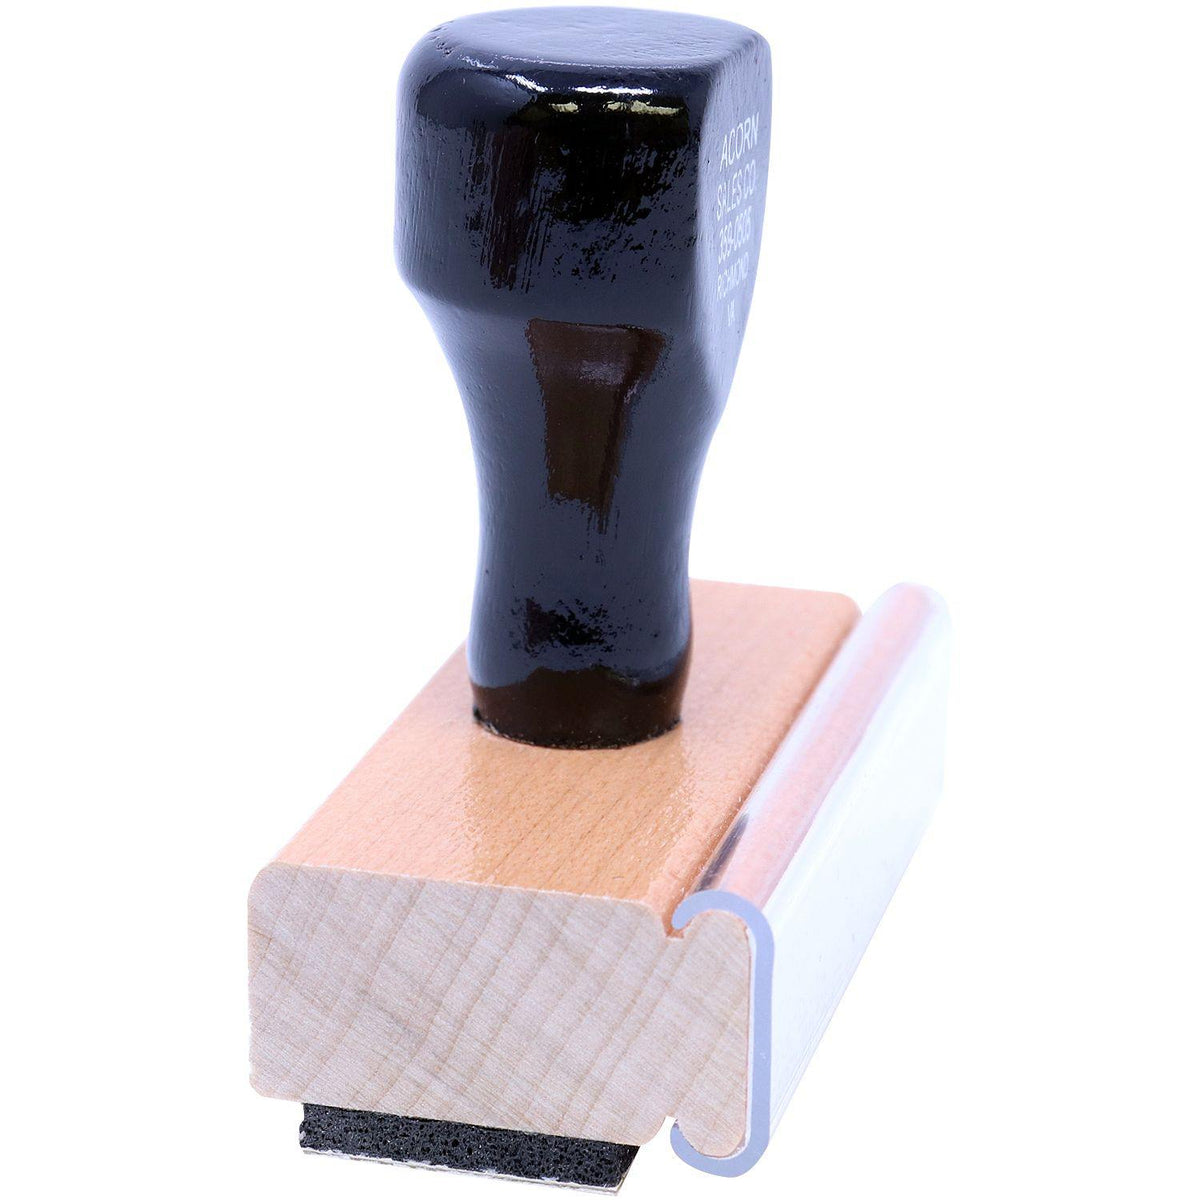 Side View of Large Media Center Rubber Stamp at an Angle